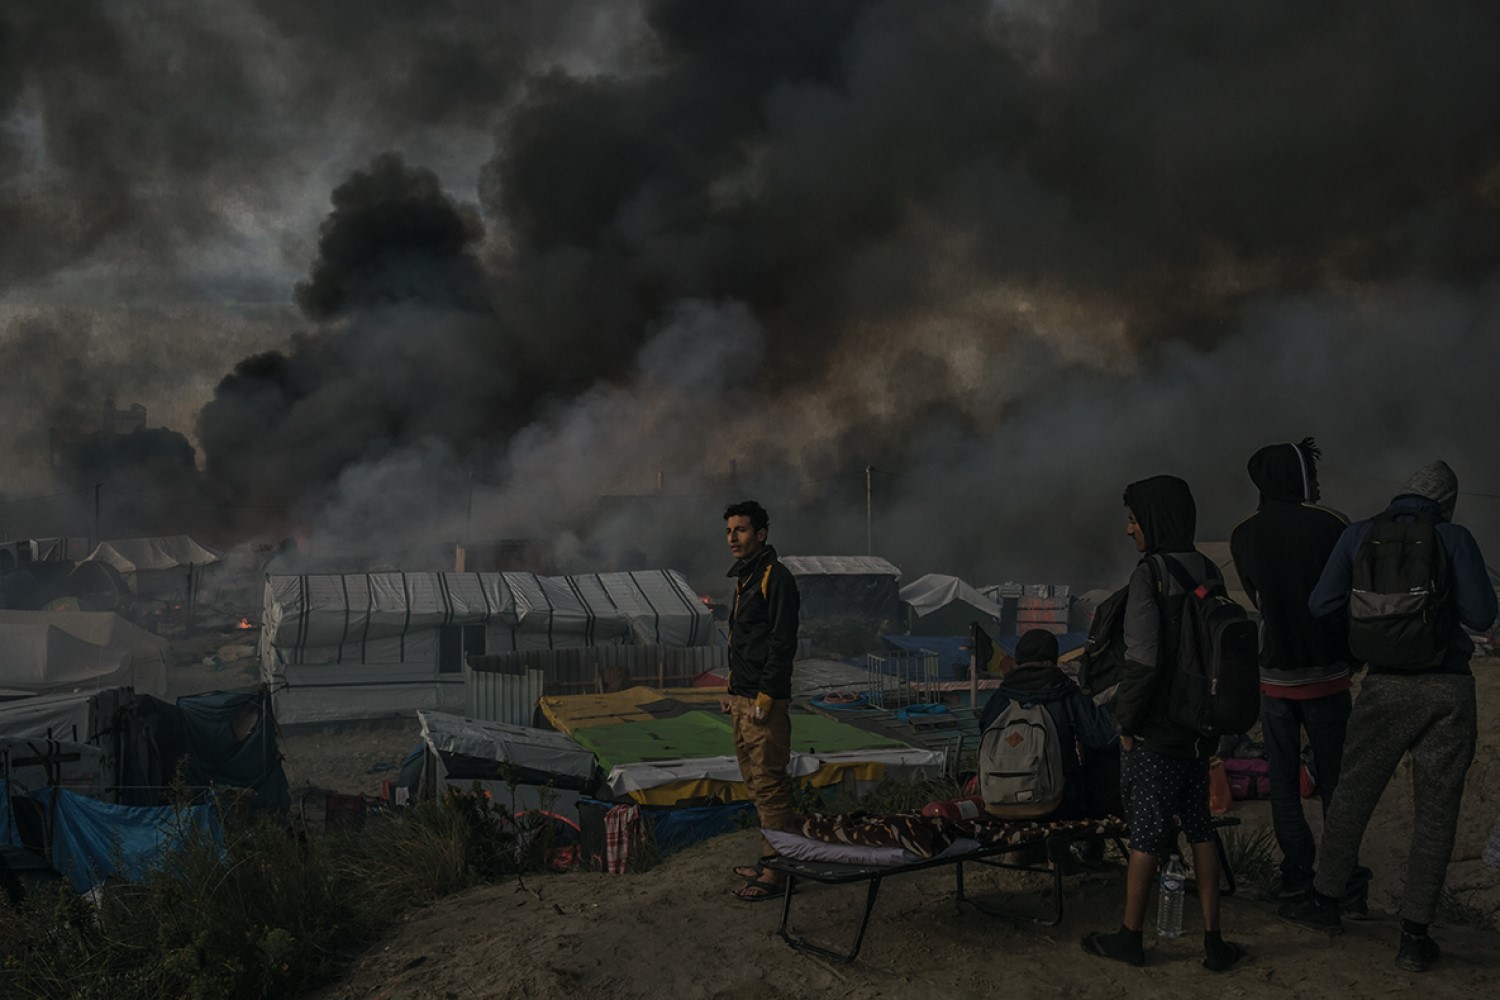 MAURICIO LIMARefugees watch a huge plume of smoke as dozens of res burn huts and makeshift shops at the camp called the â€œJungleâ€, in Calais, northern France October 26, 2016. Â© Mauricio Lima for The New York Times